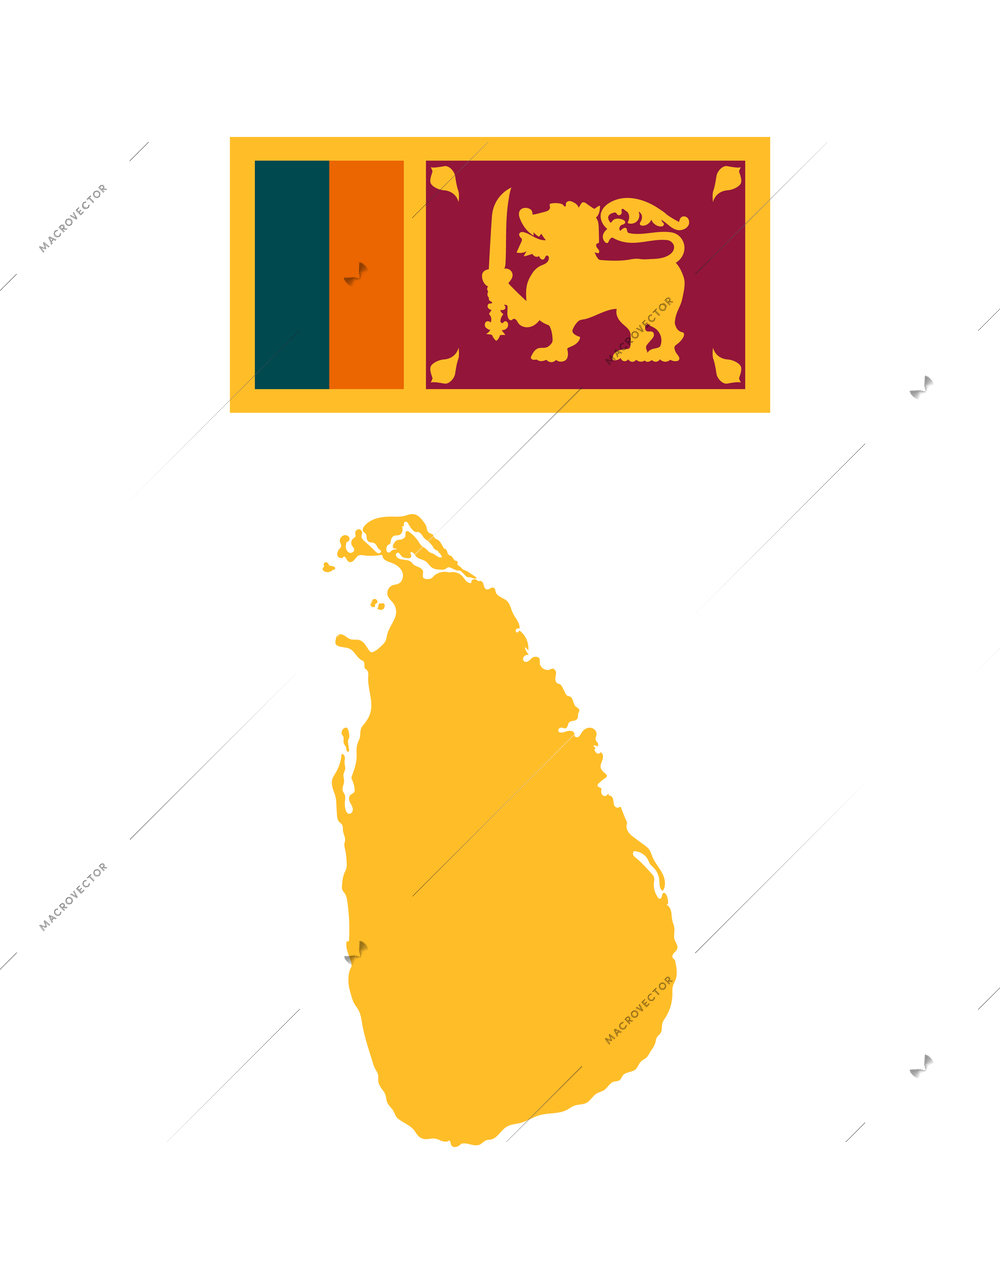 Sri lanka tourism travel composition with isolated image of country border silhouette and national symbols vector illustration